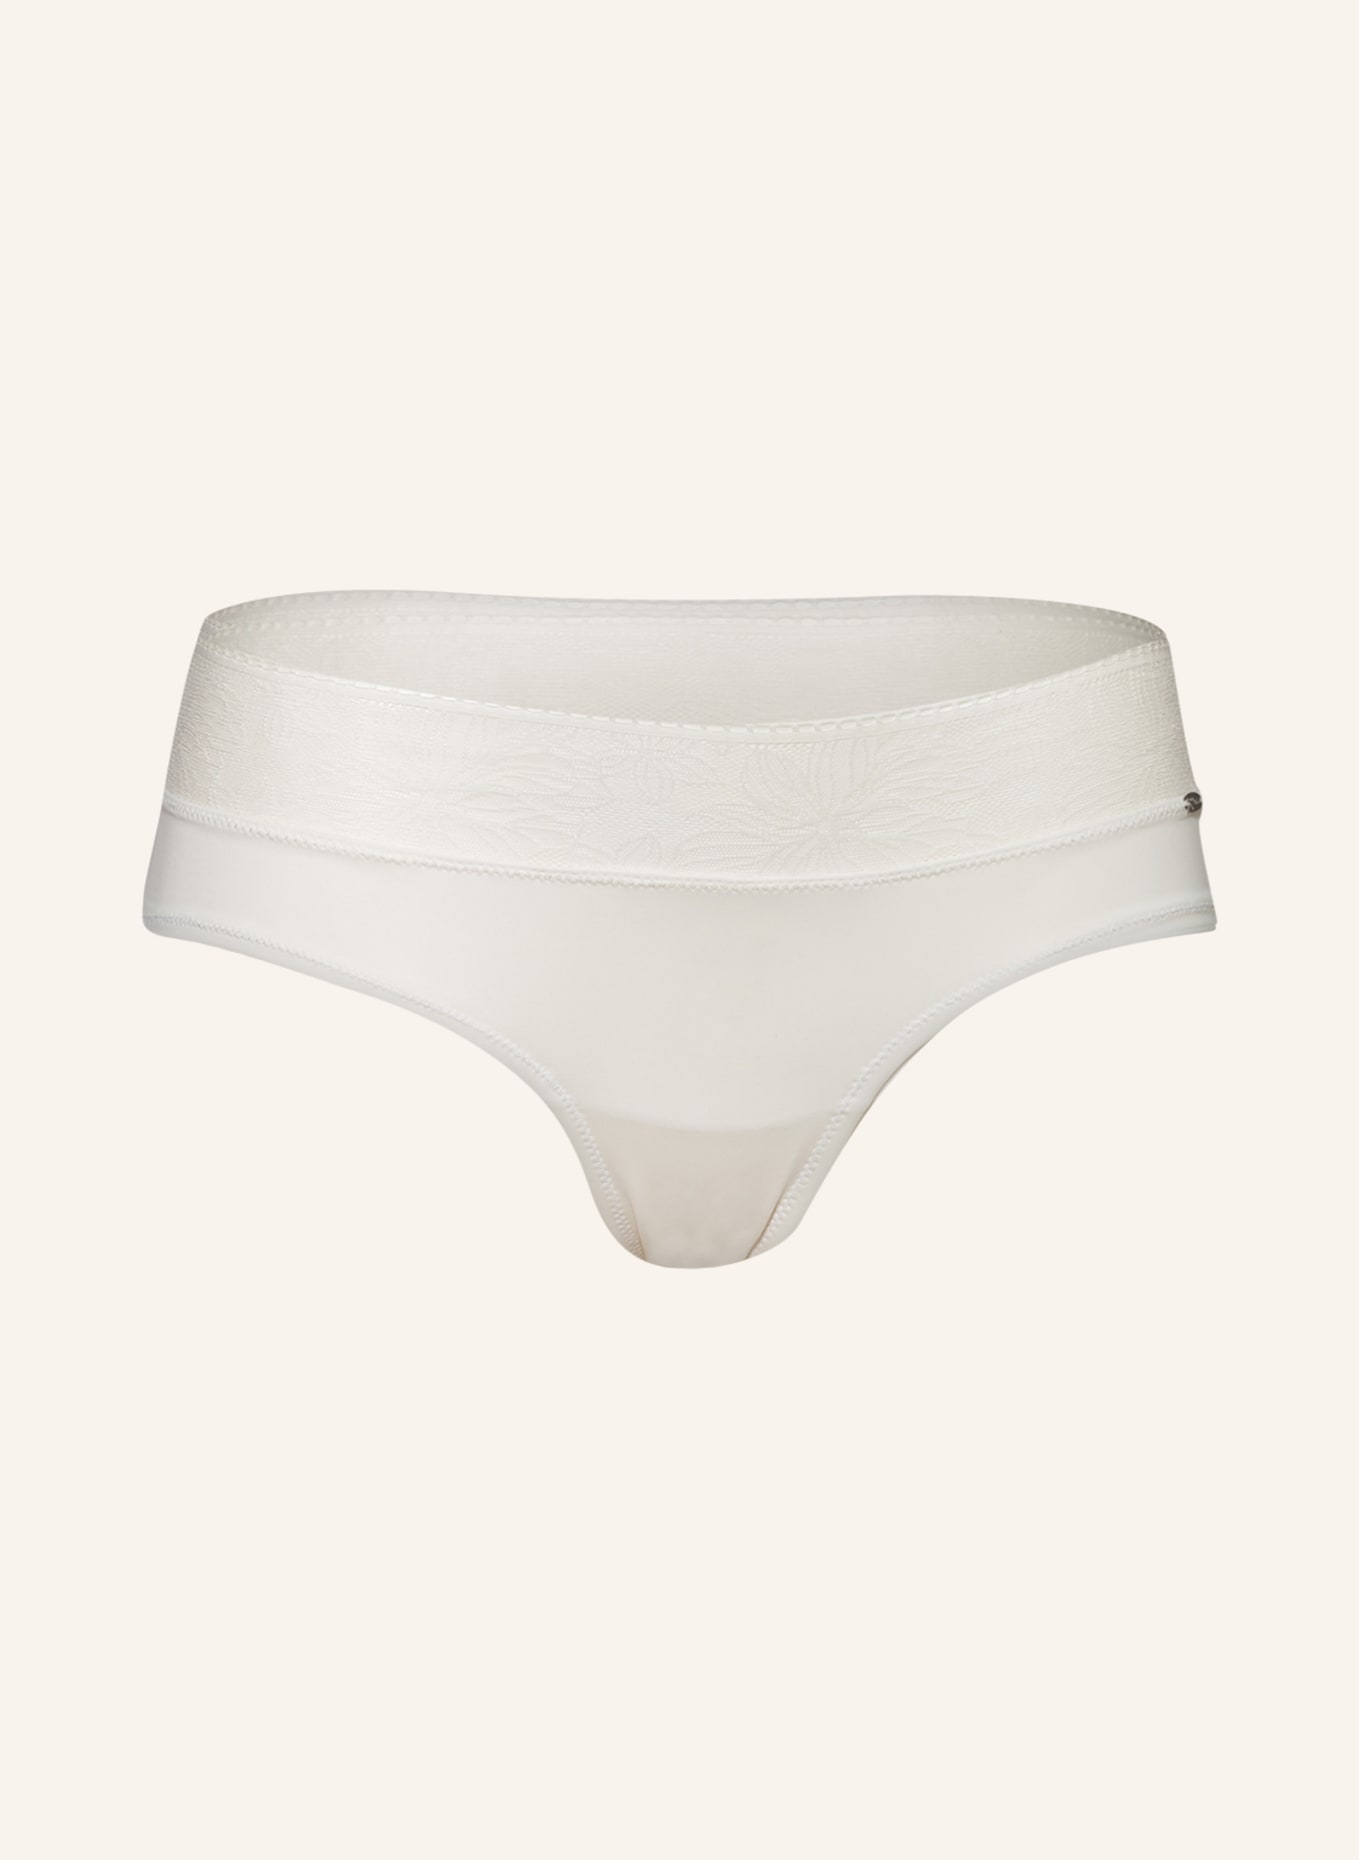 Skiny Panty EVERY DAY IN MICRO LACE, Farbe: CREME (Bild 1)